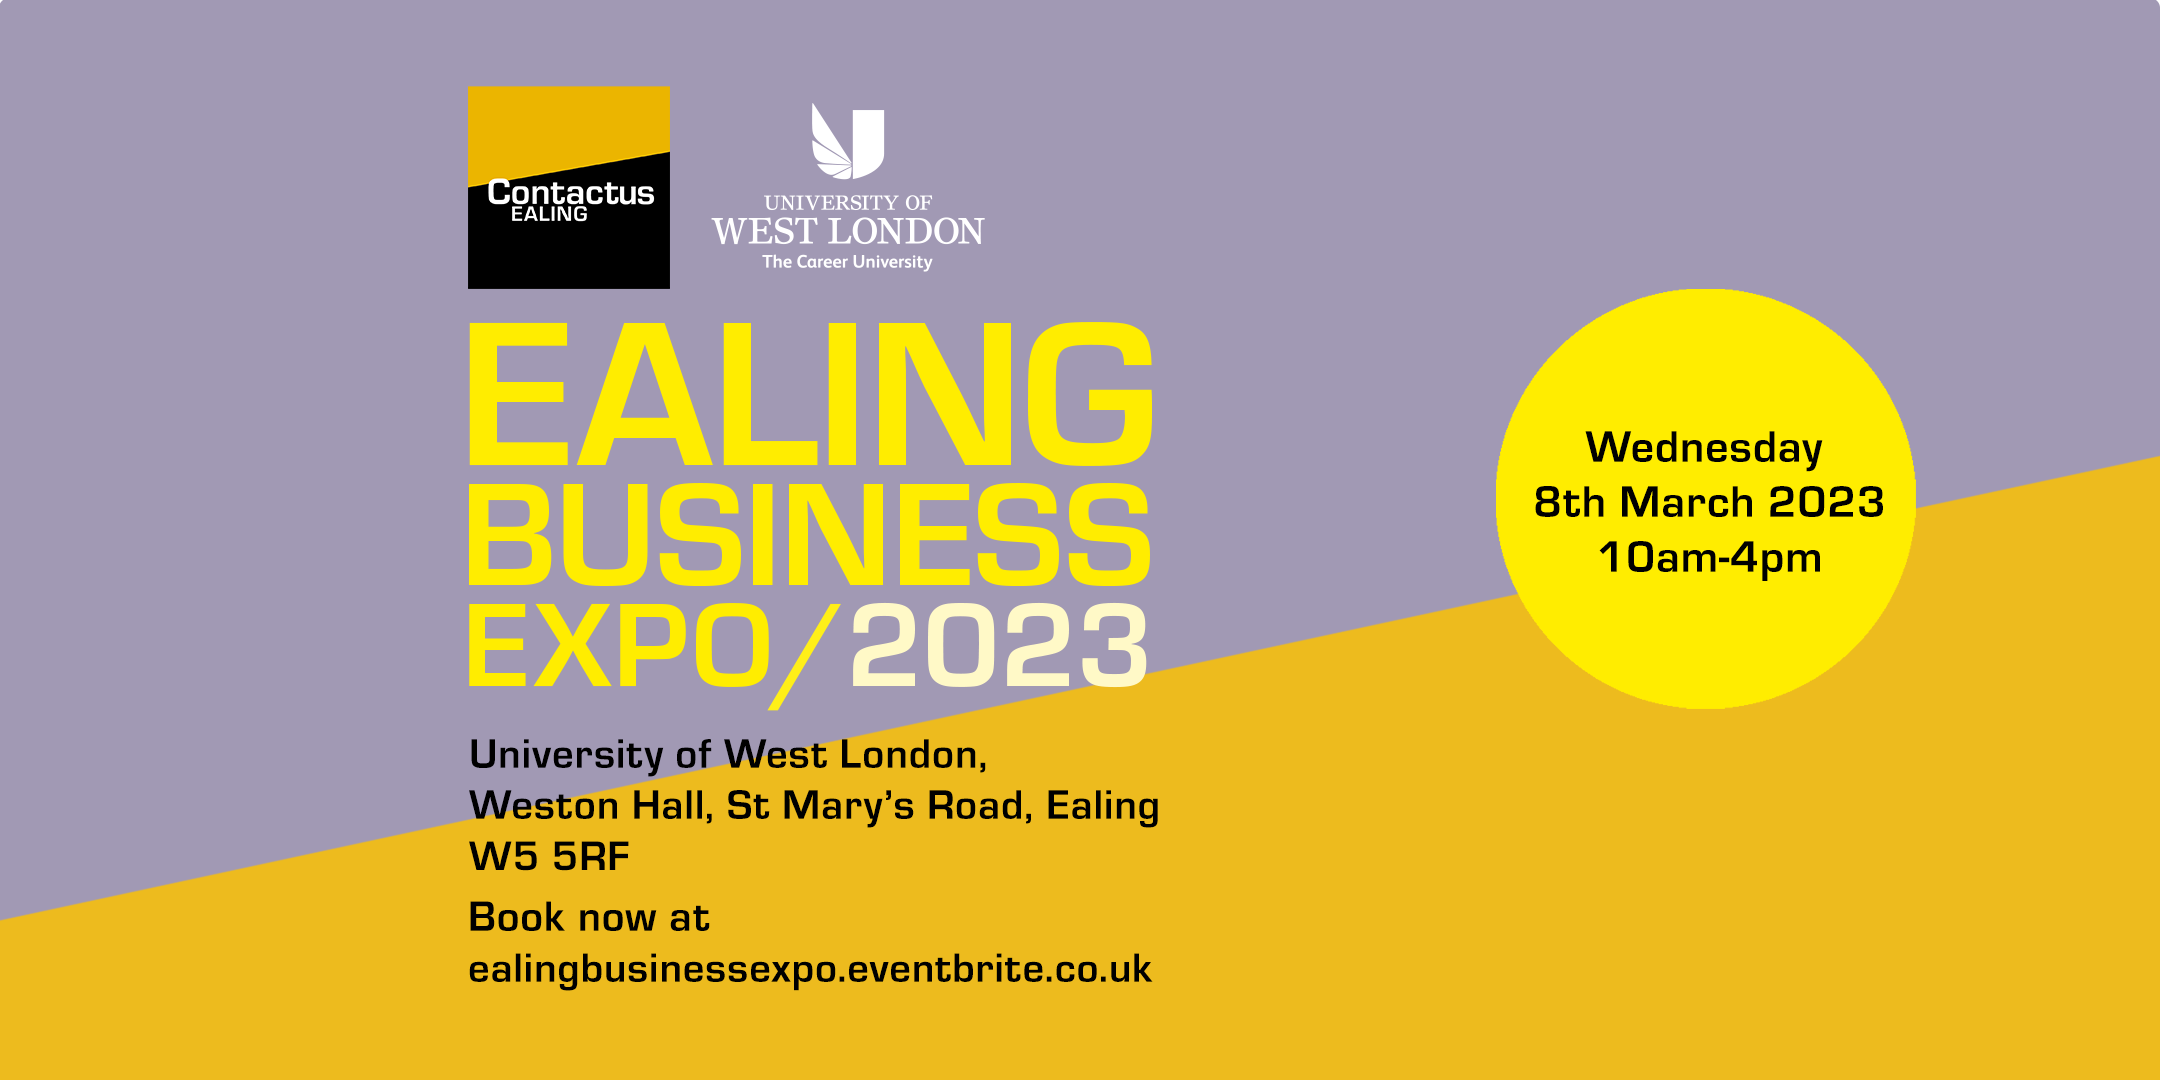 Ealing Business Expo - Wed 8 March 2023 EXHIBITOR 1